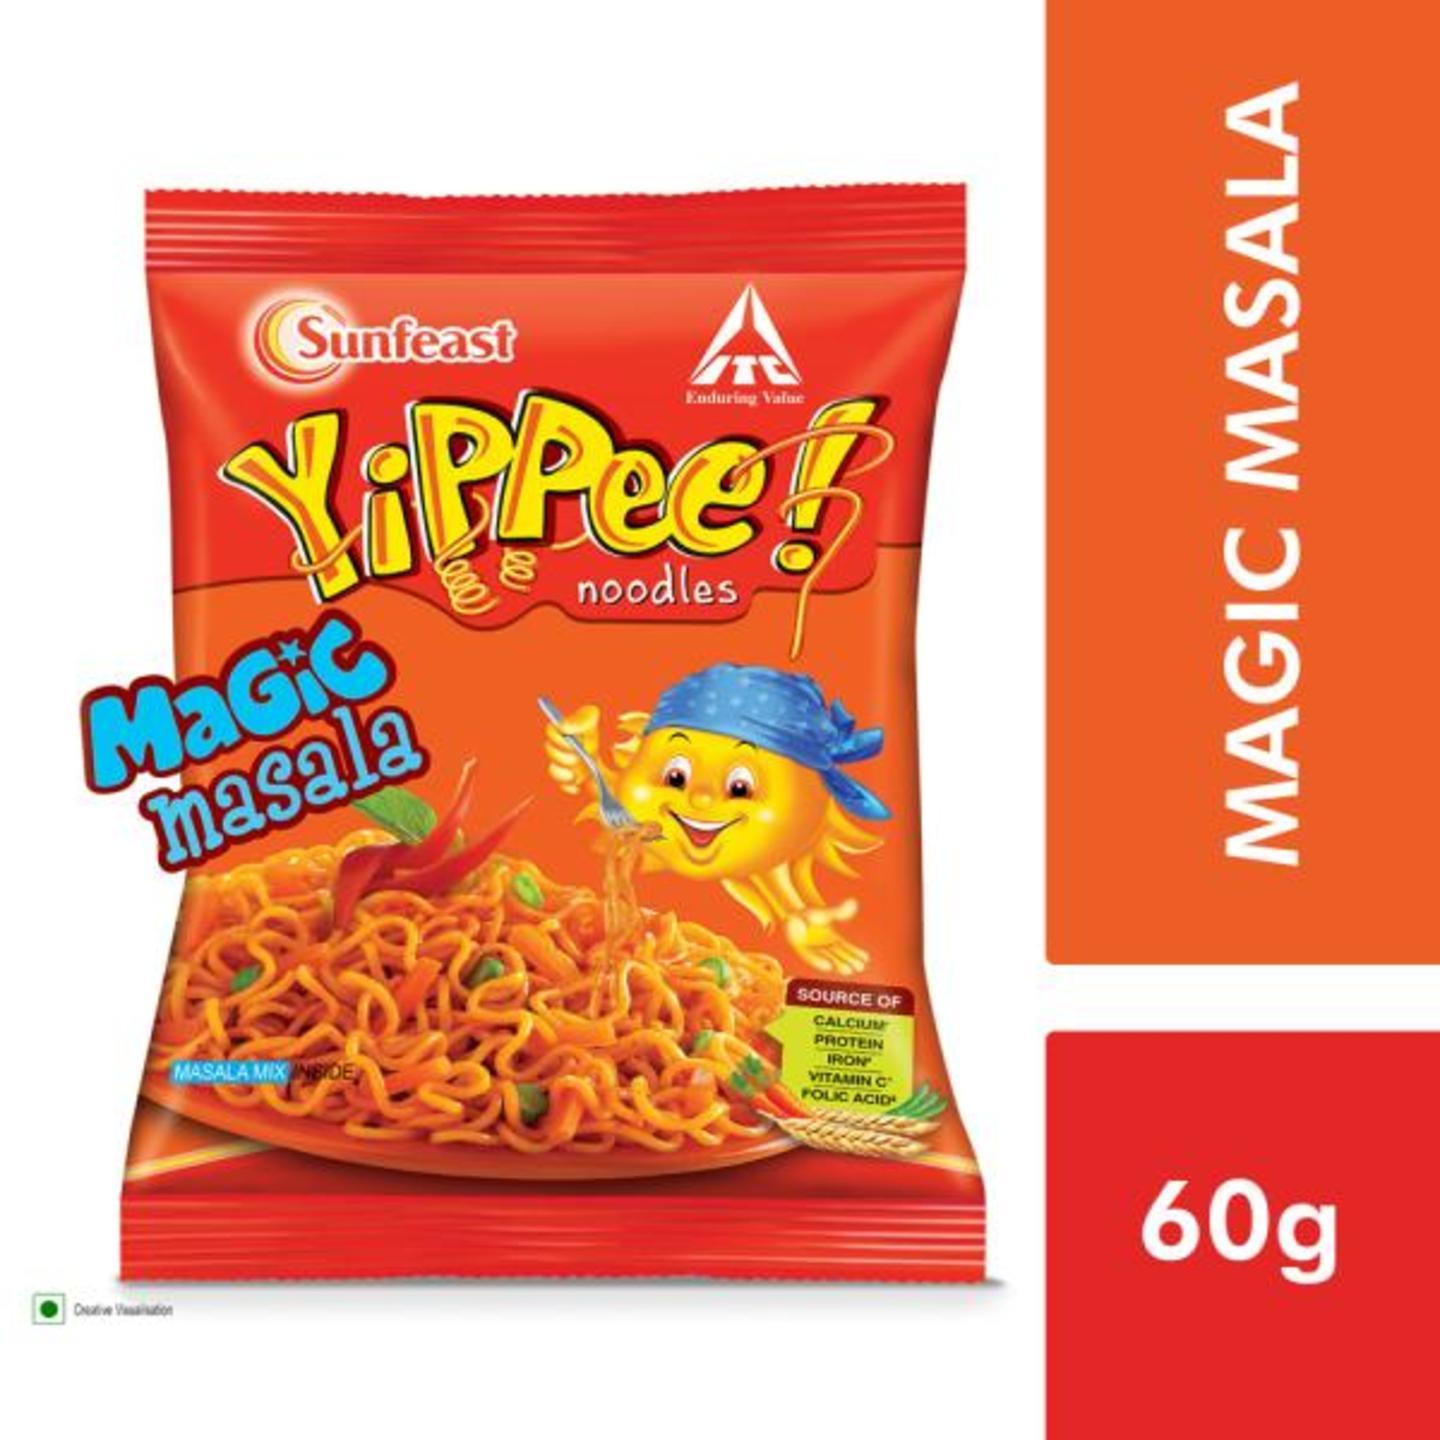 Sunfeast Yippee Magic Masala Instant Noodles 60 g